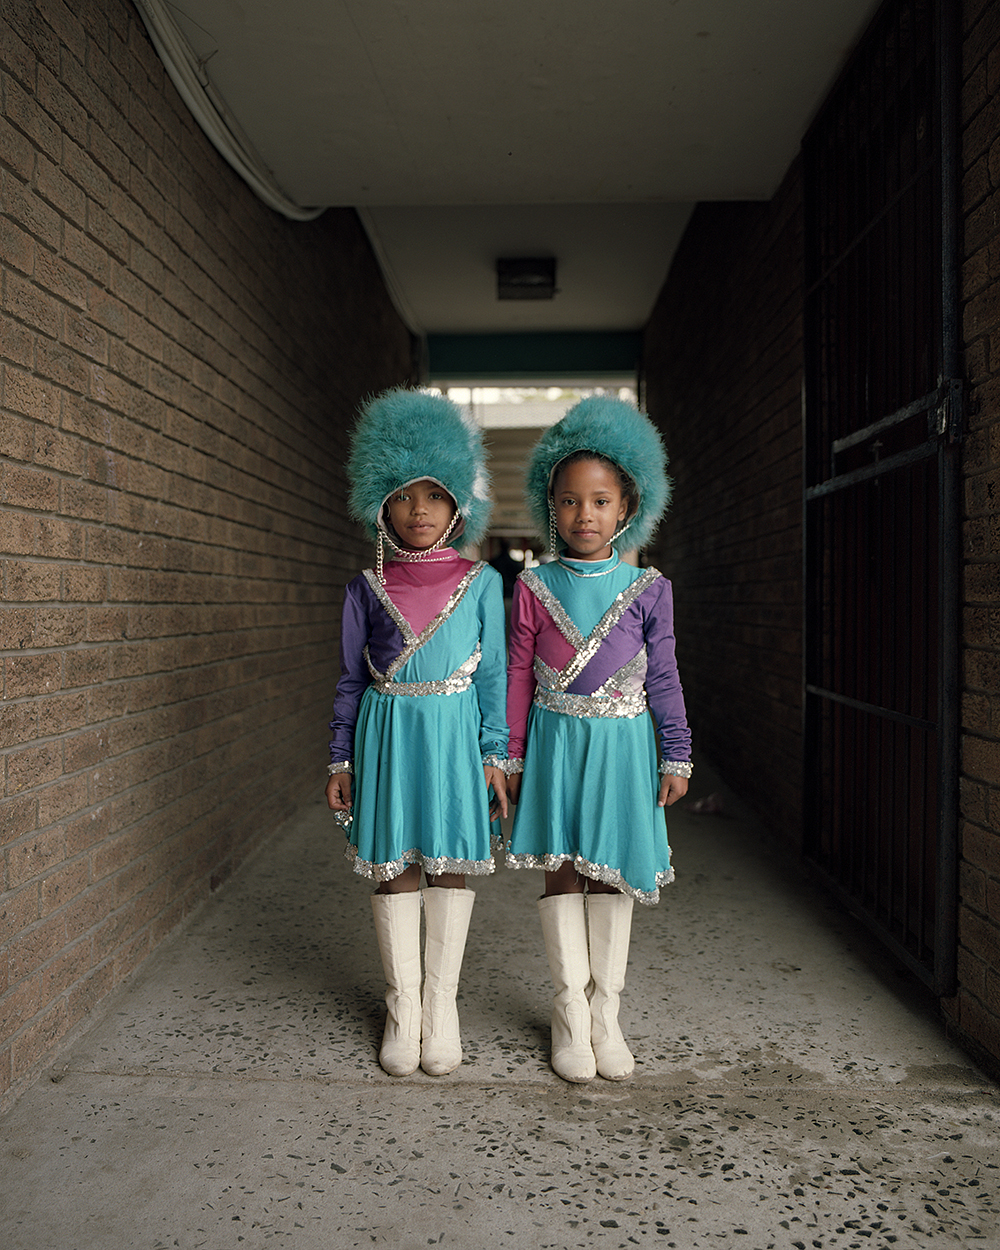 Amber Matthews and Ra’eesha Maneveldt are two of the junior members of the drum majorettes team. Most of the girls join the team very young, in their first year of school.